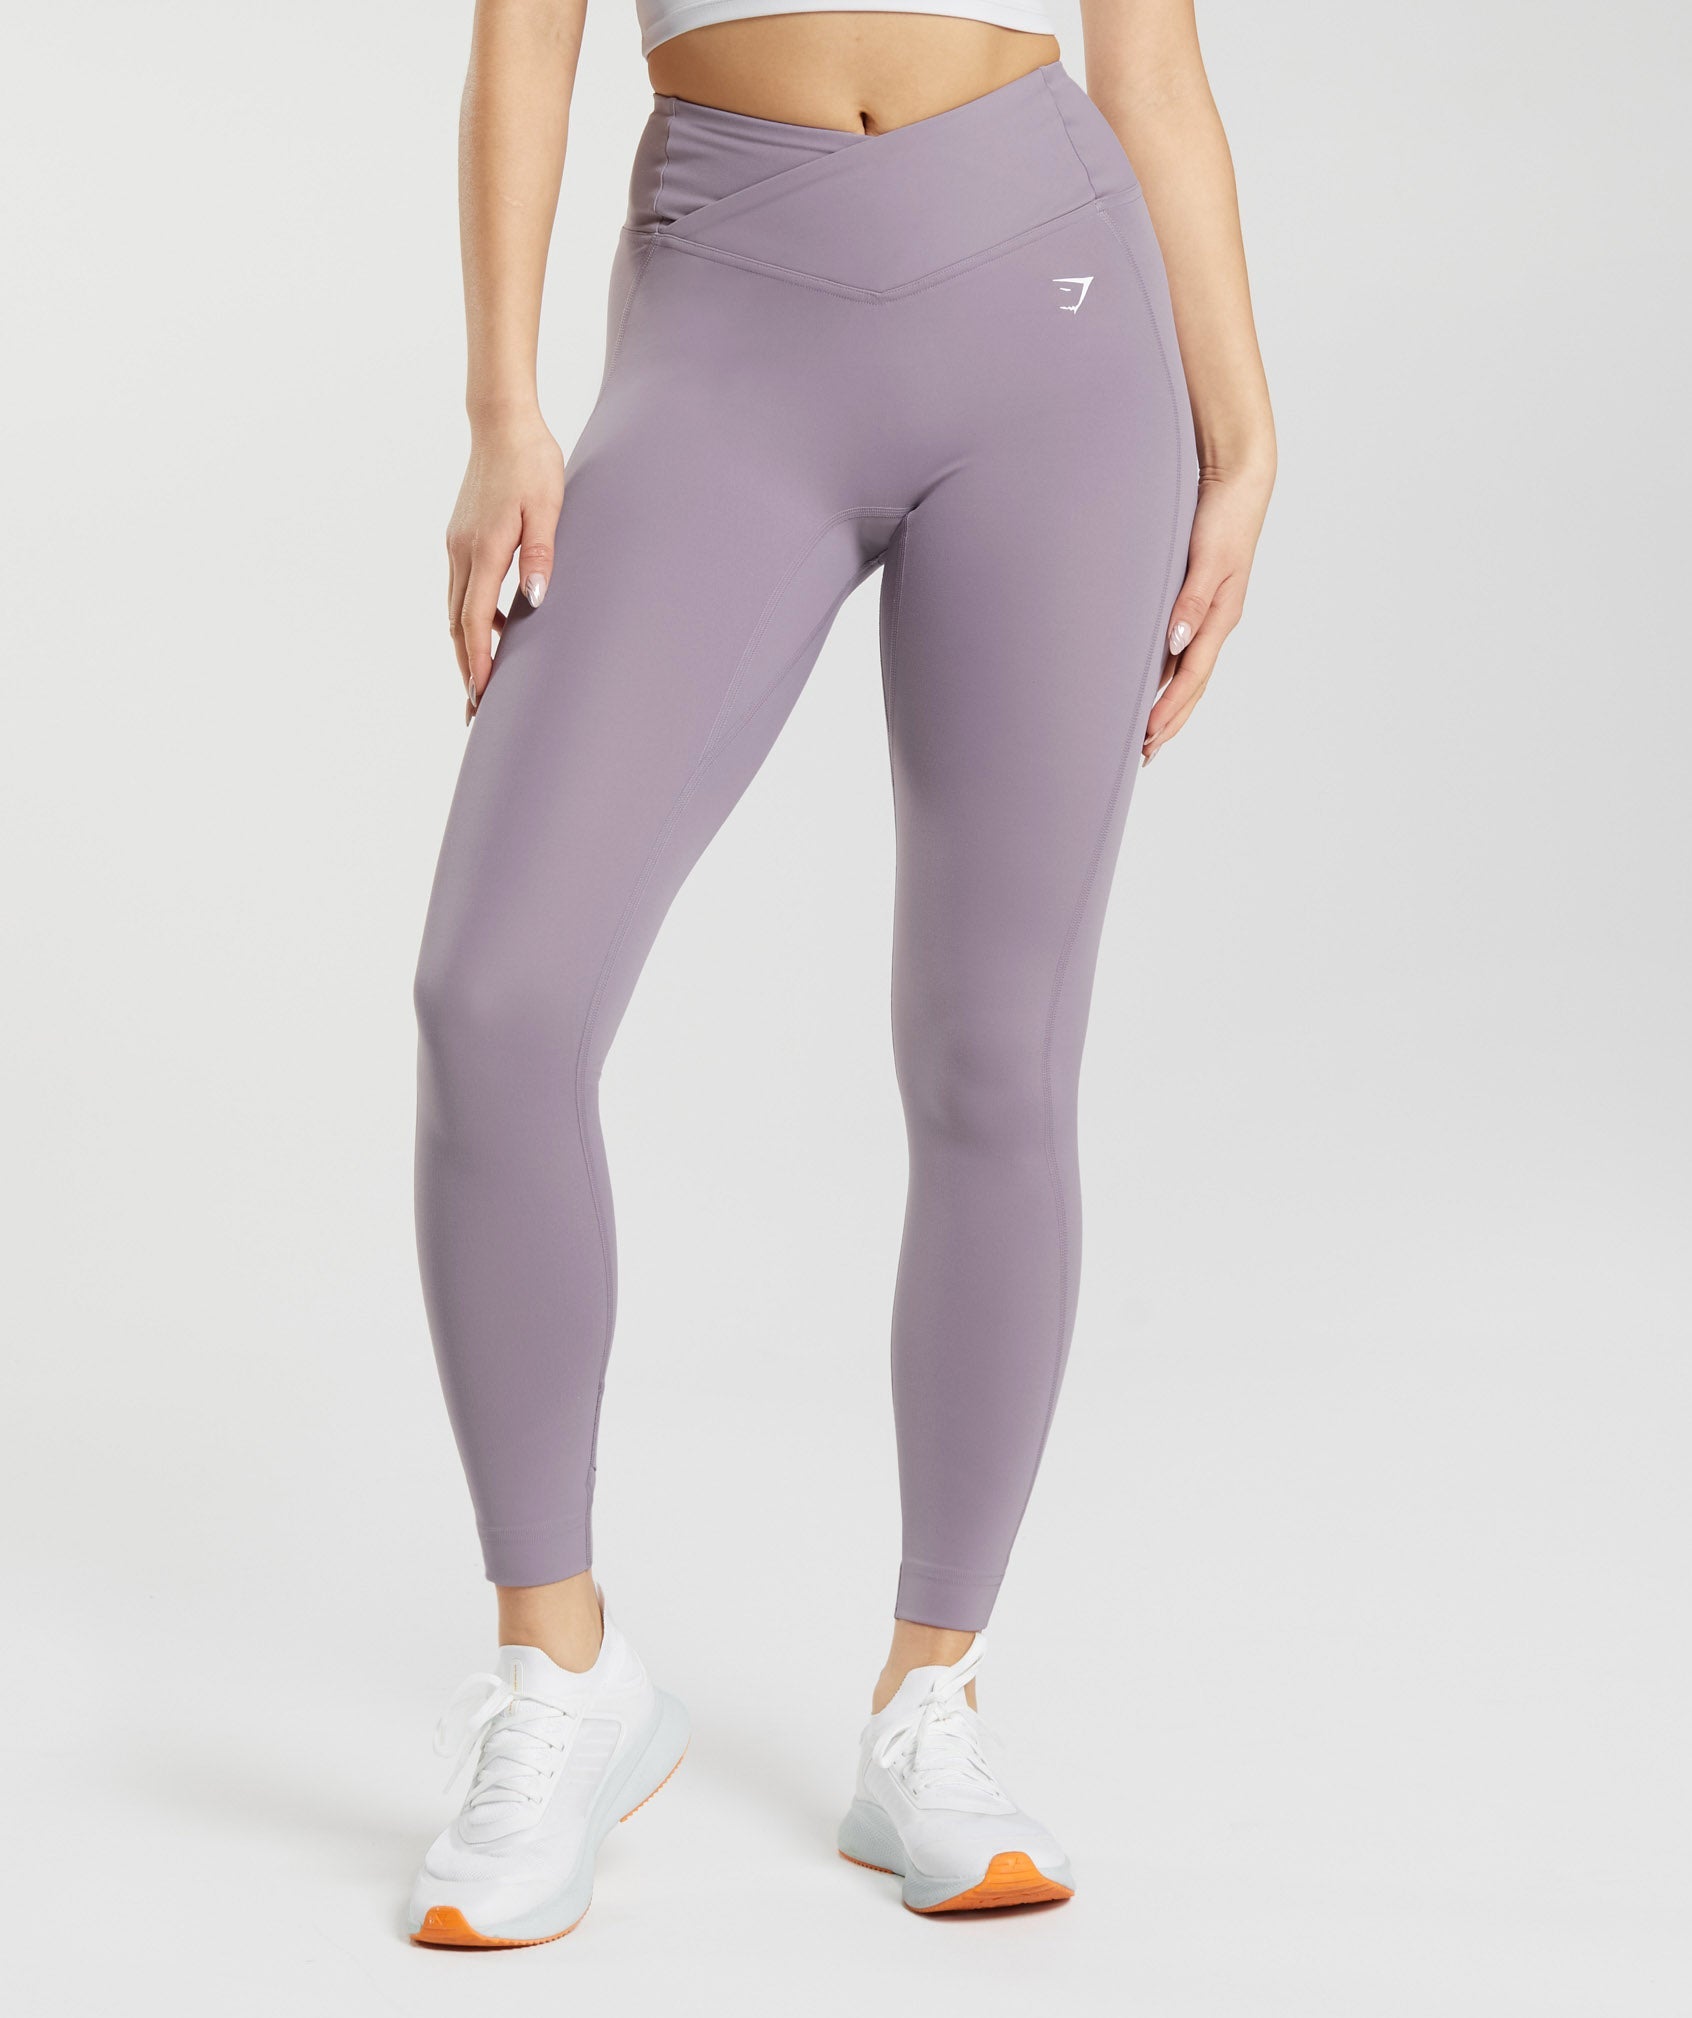 Athletic Leggings, XL Purple - $25 (34% Off Retail) New With Tags - From  Lindys